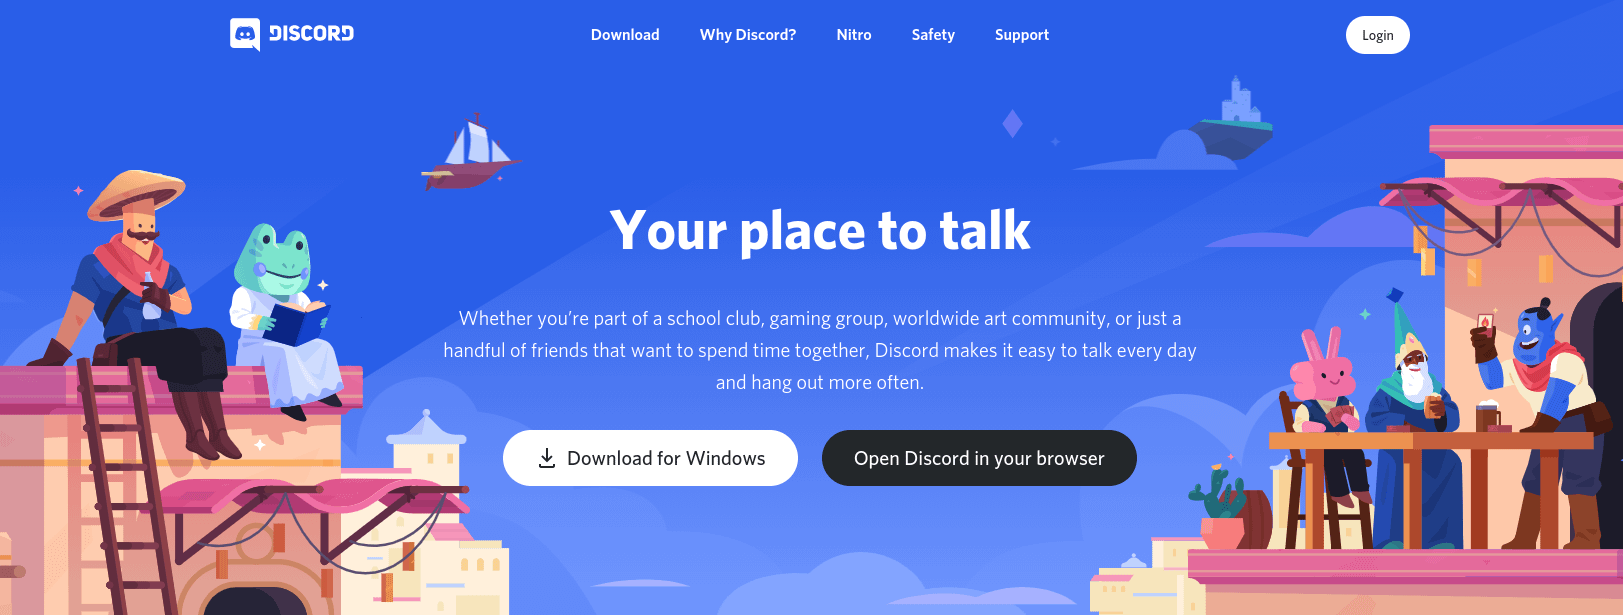 The Discord website homepage.